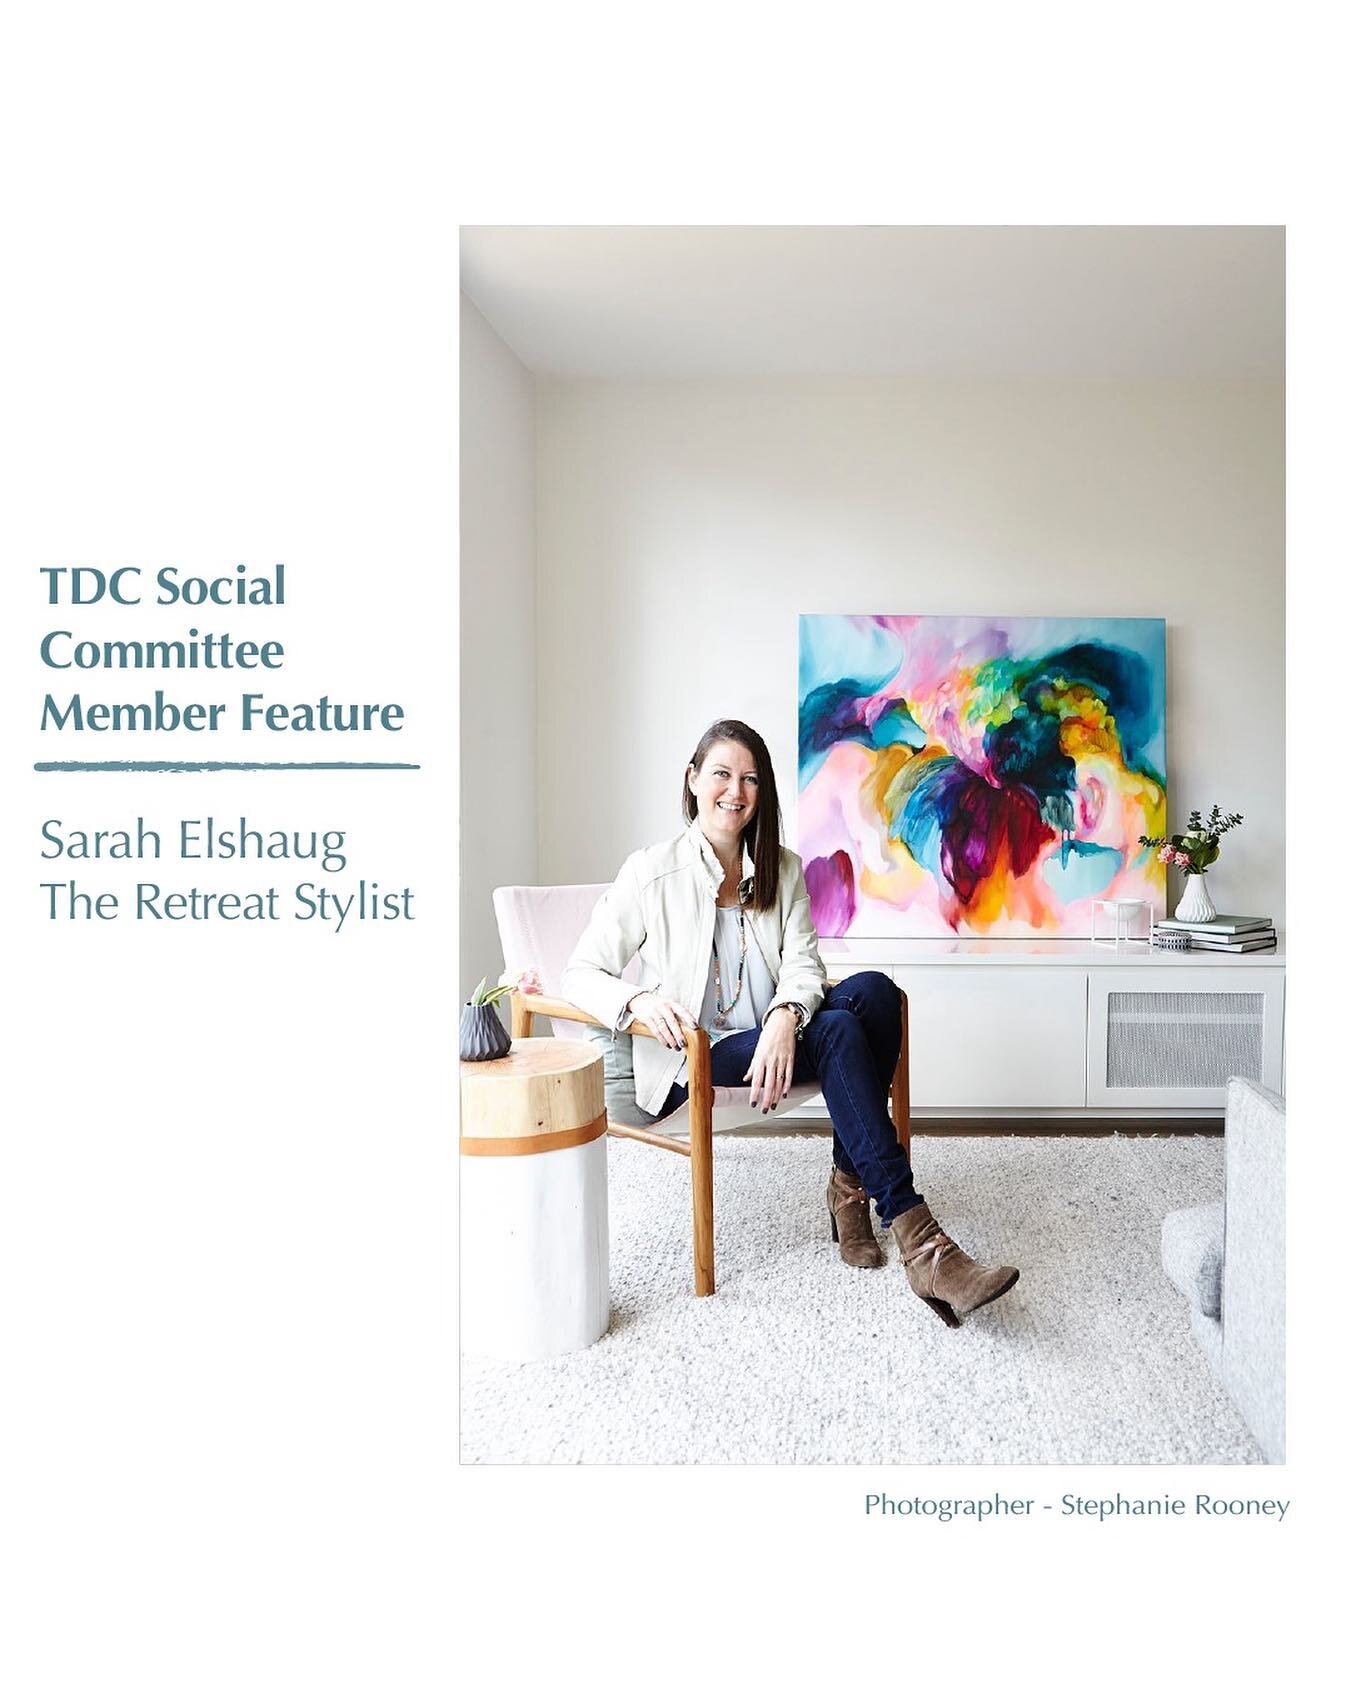 I&rsquo;m excited to join @thedesigncoach_au as a Committee Member of TDC Social Club✖️ our inaugural industry event will be hosted by @ingoodcompany__  this Wednesday ✖️ Lou, John, Sam and the team are looking forward to inviting TDC Social Club mem